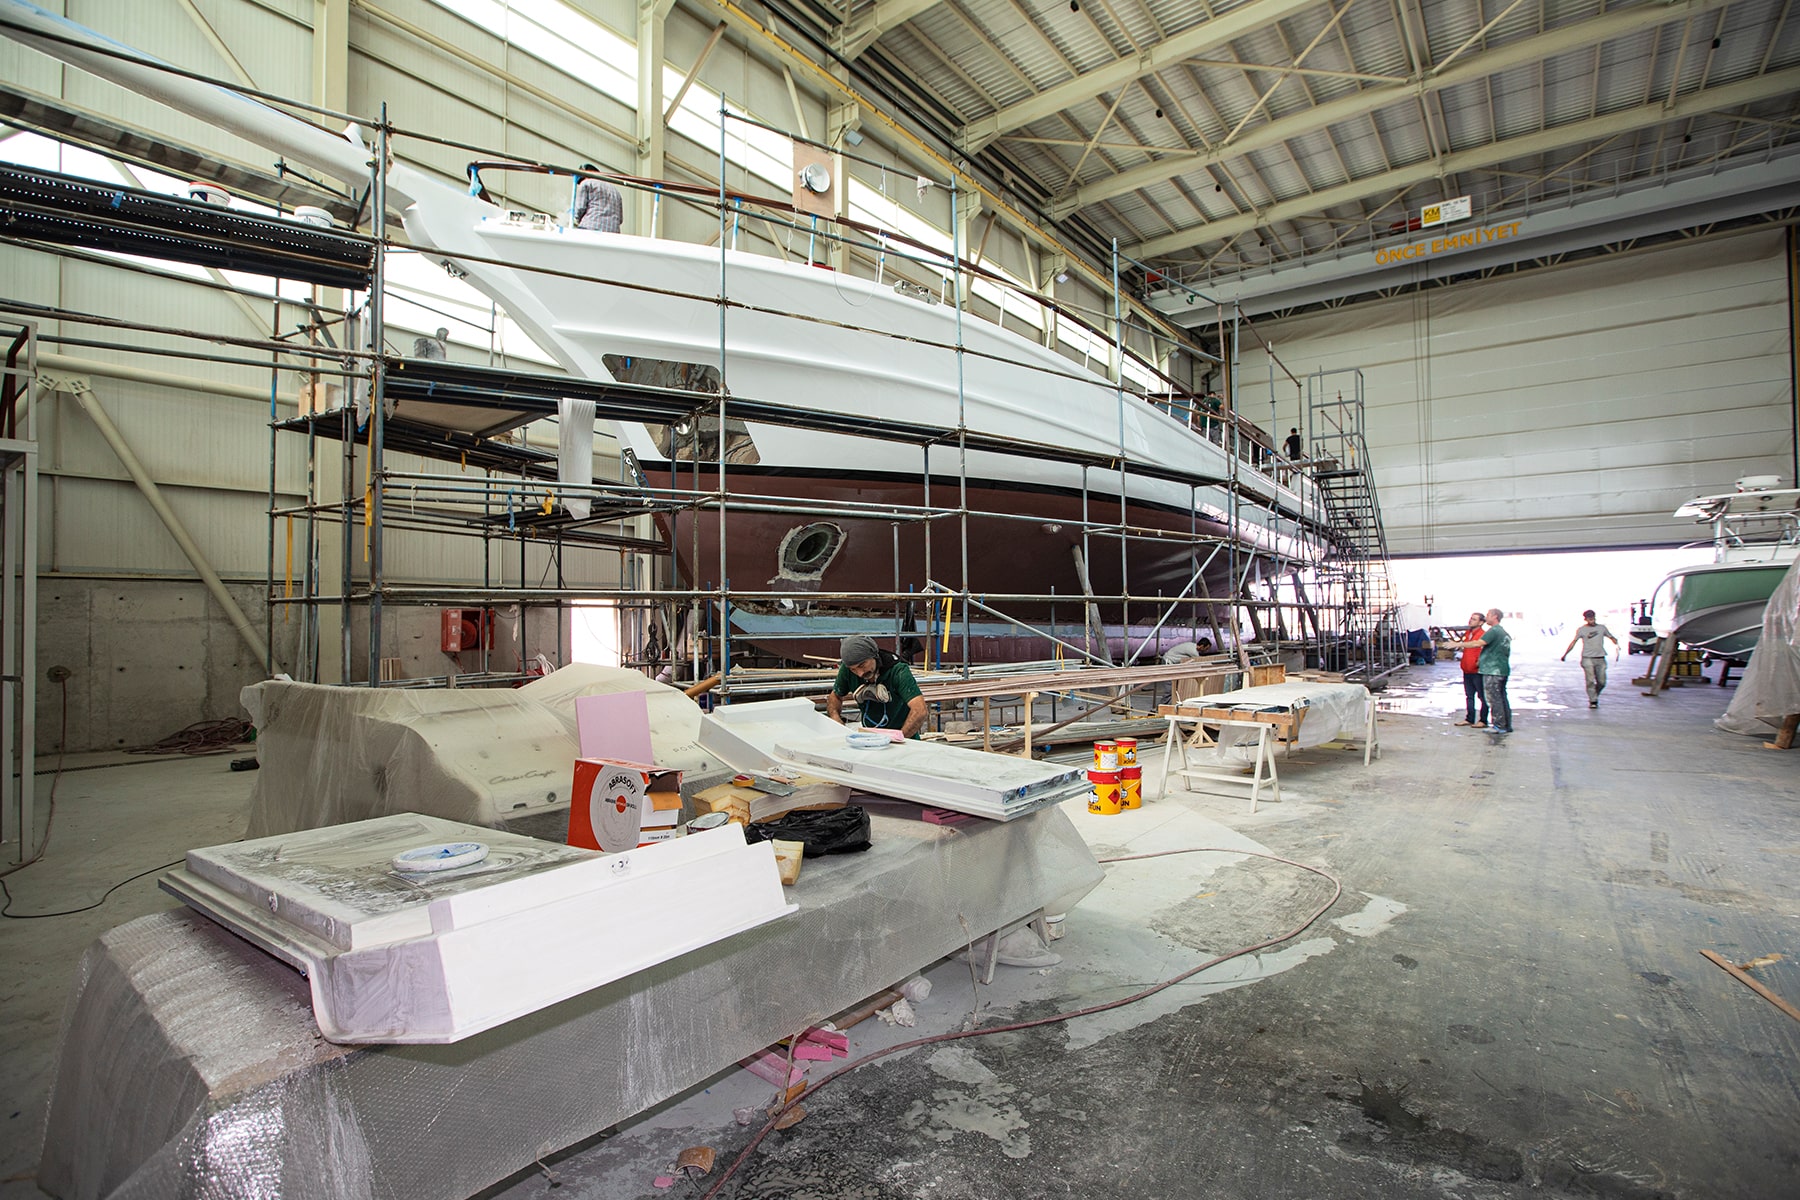 fdc-yachts-project-white-wings-motor-sailor-image02